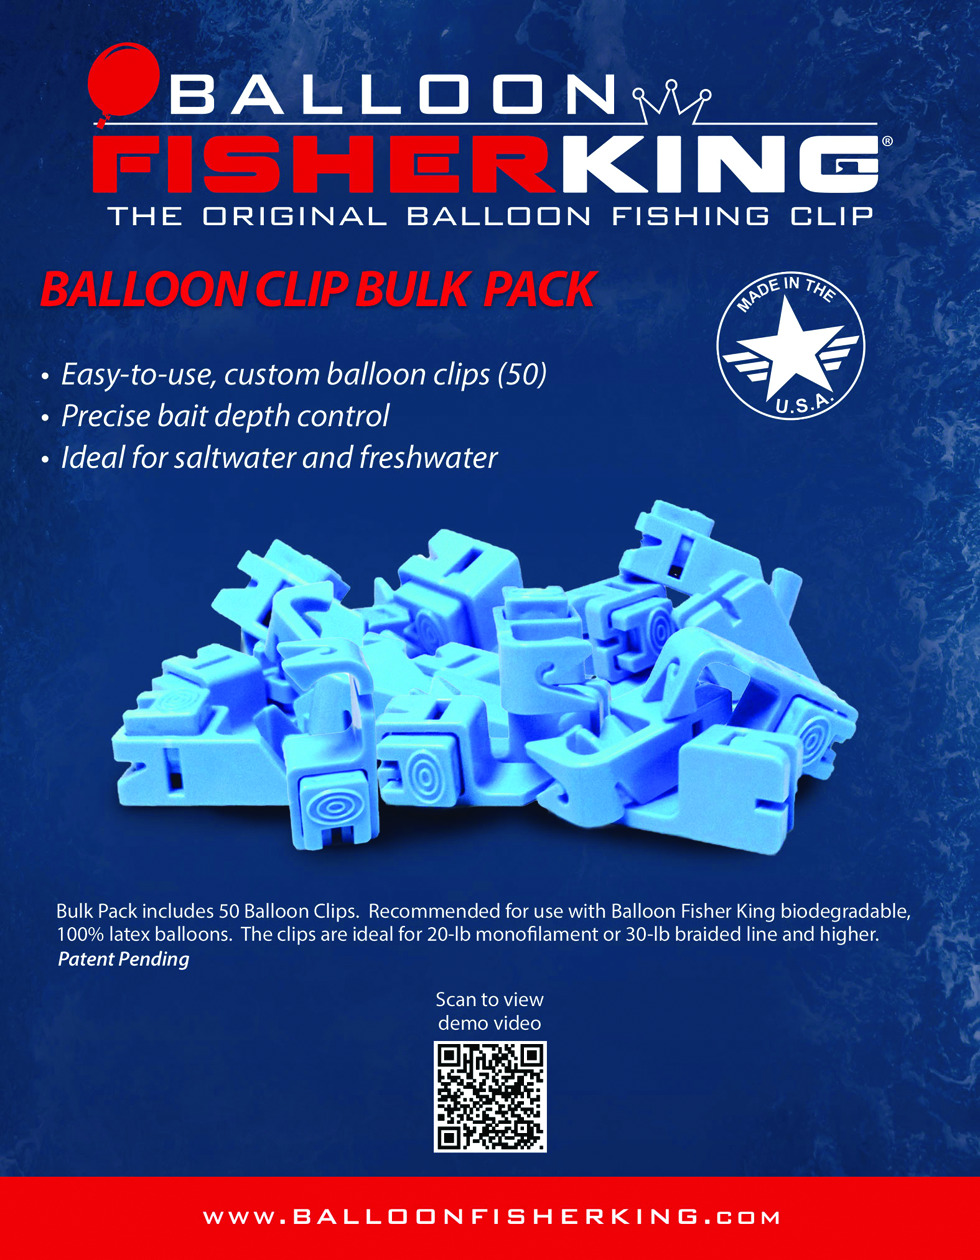 Balloon Fisher King Balloon Bulk Pack 402 , $10.91 Off with Free